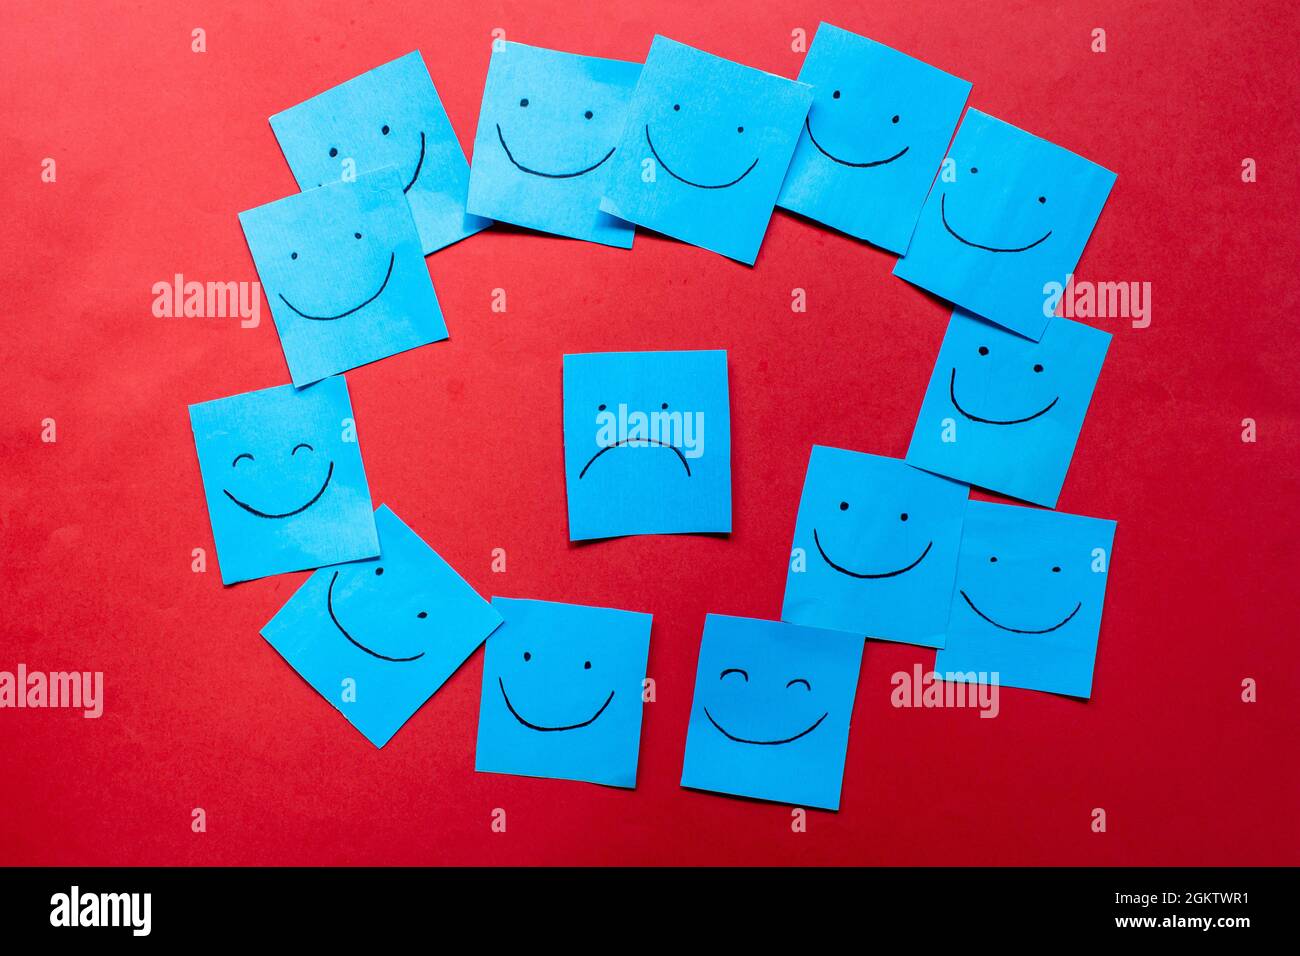 Hand drawn faces on stickers. One sad face among happy faces. Exclusion,discrimination,  difference concept. Stock Photo